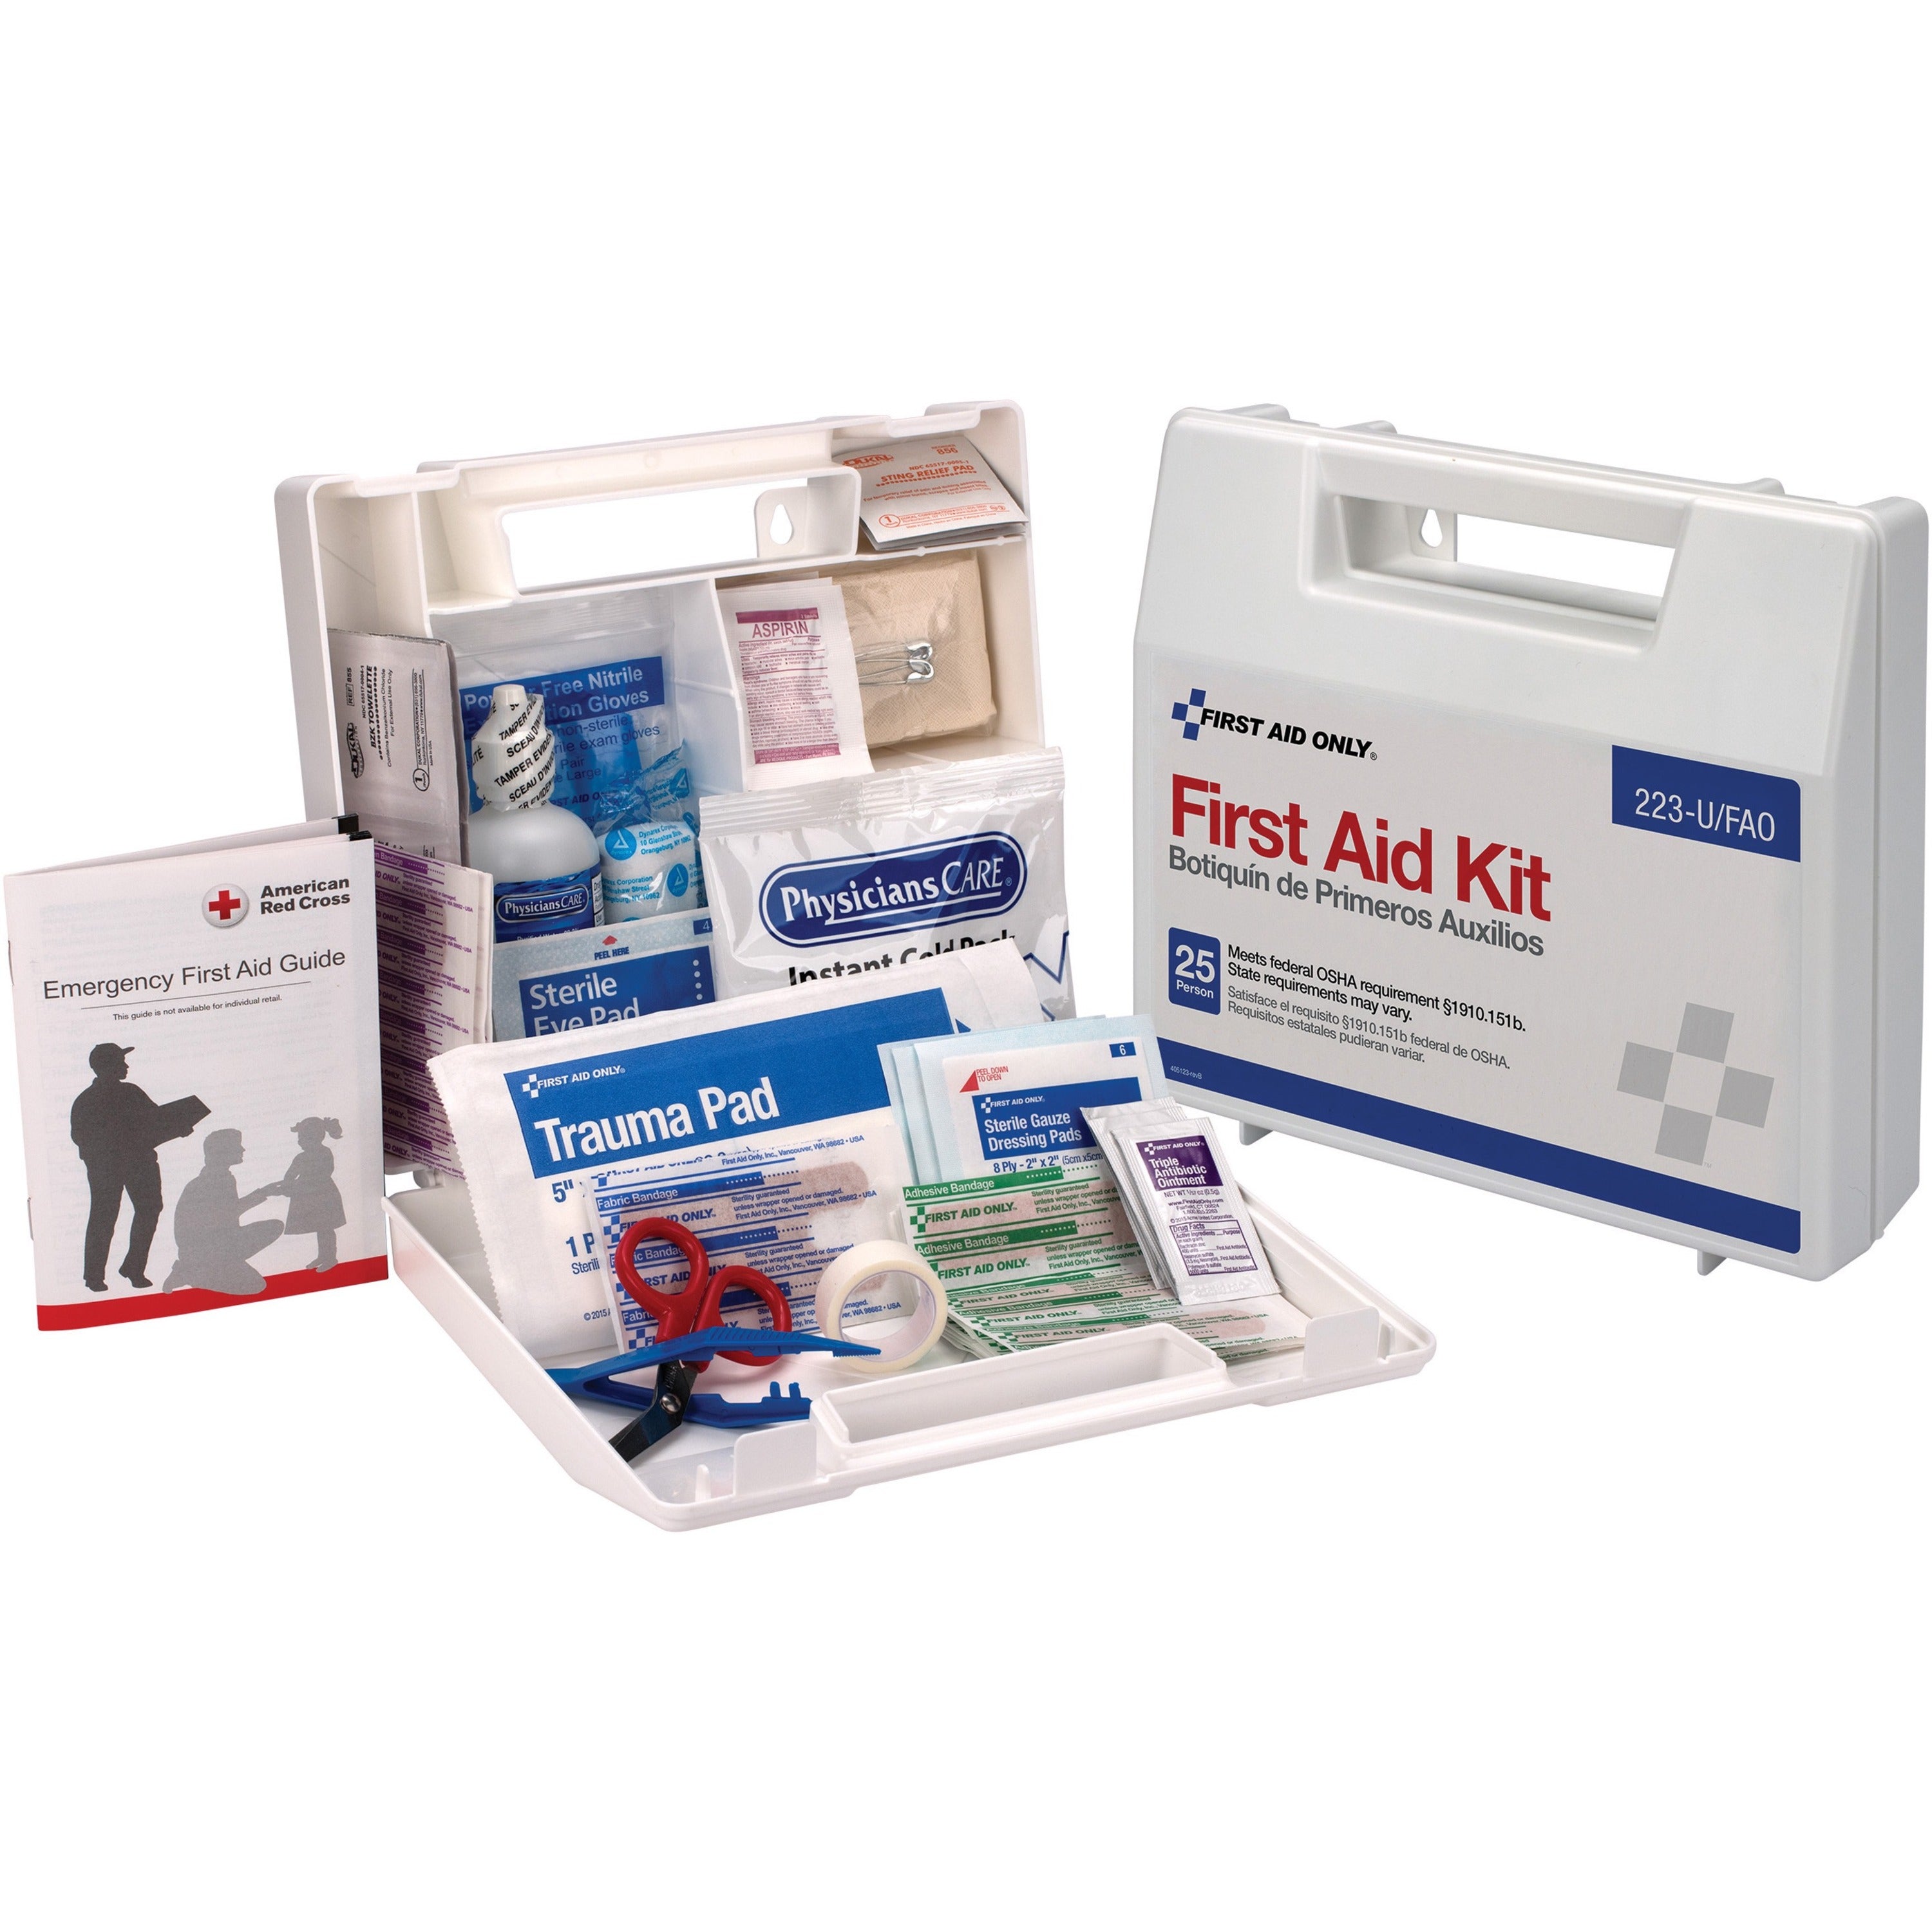 first-aid-only-25-person-bulk-first-aid-kit-107-x-pieces-for-25-x-individuals-25-height-x-84-width-x-9-depth-length-plastic-case-1-each_fao223ufao - 1